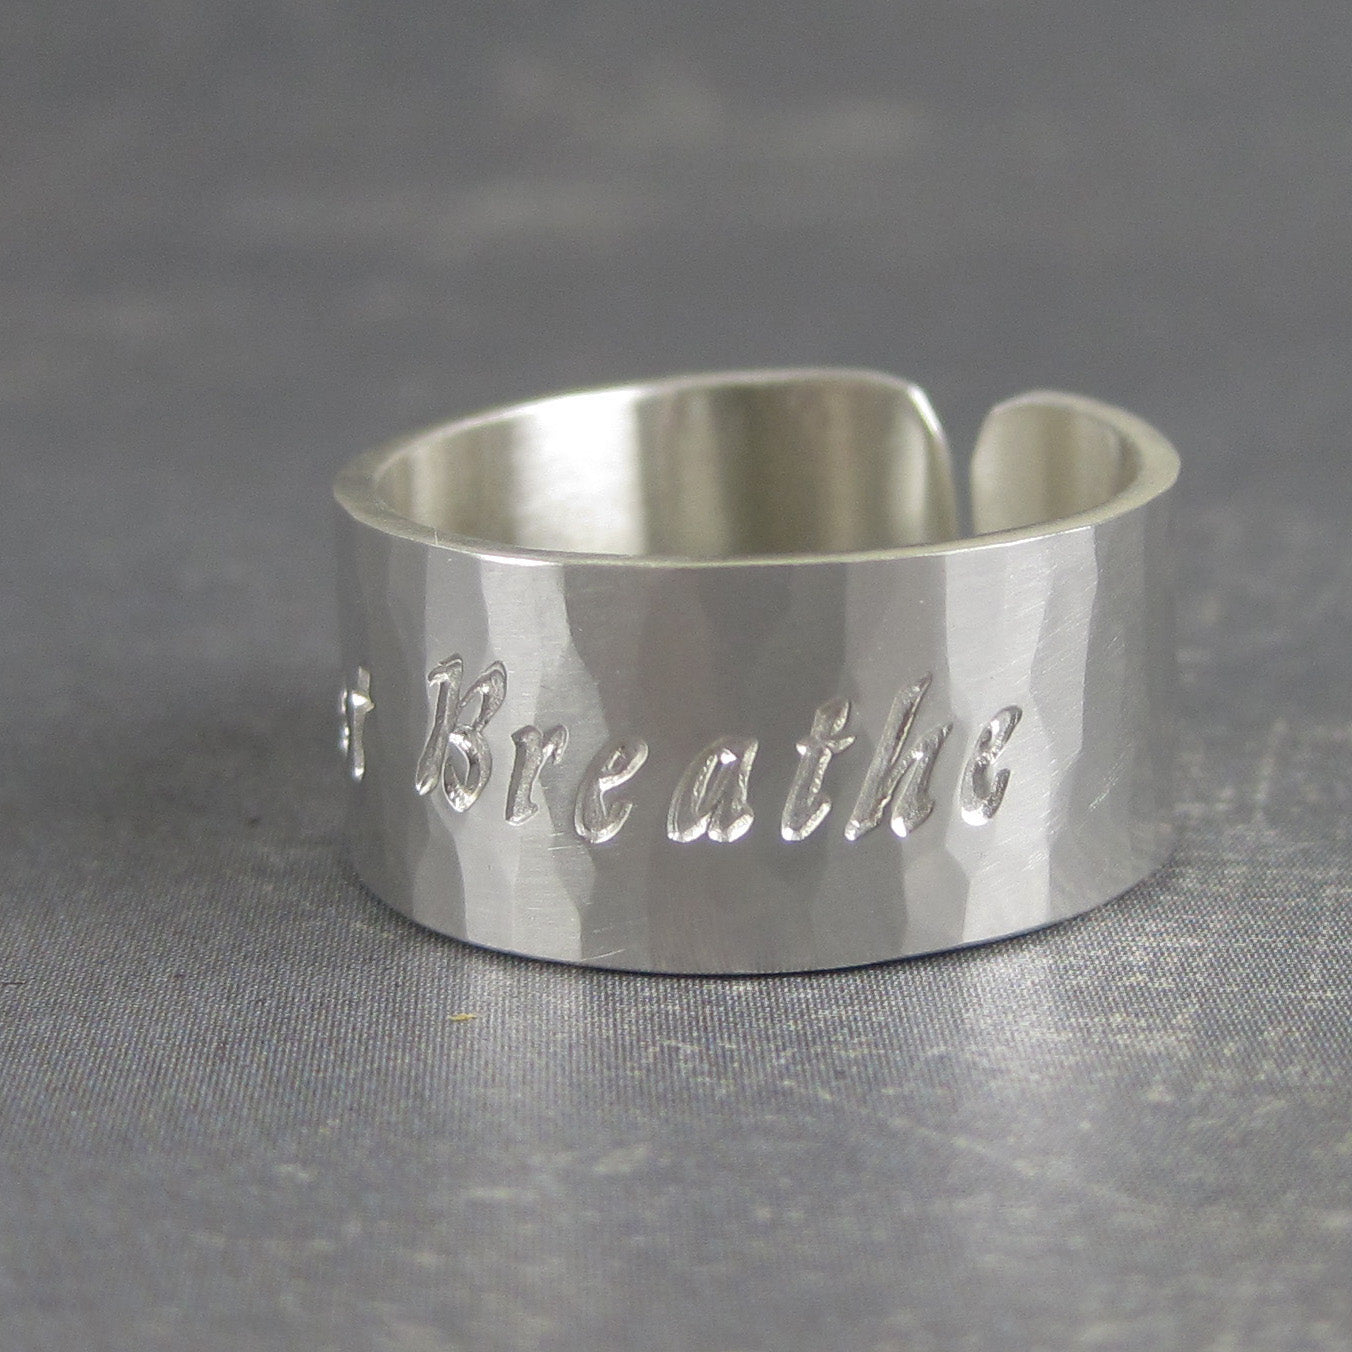 Just Breathe inspirational cuff ring